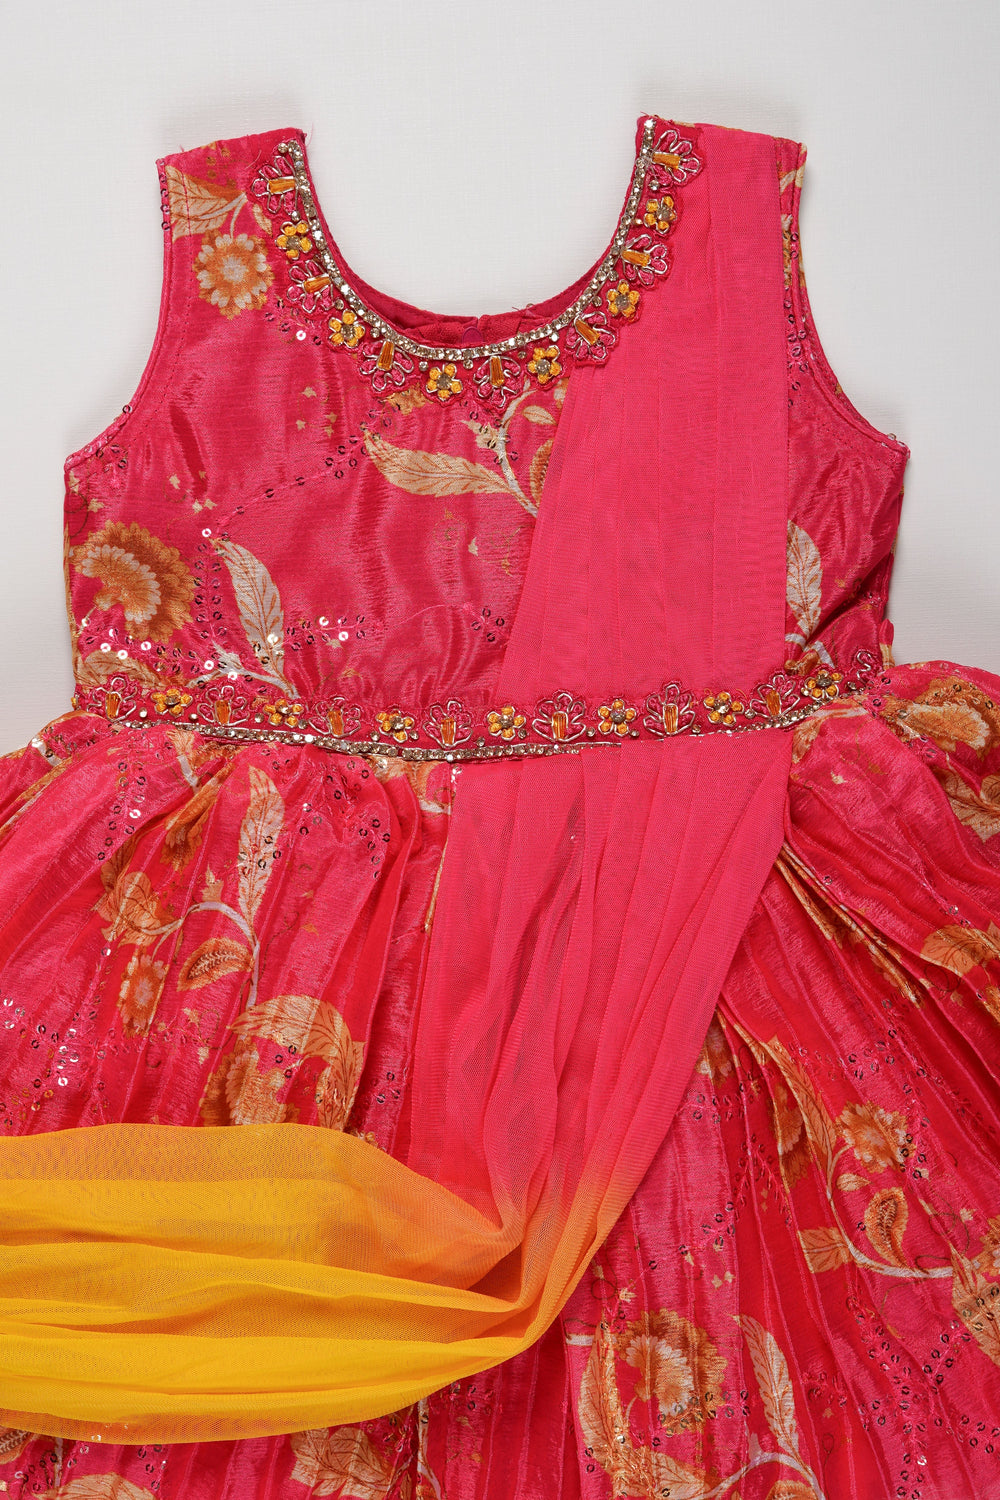 The Nesavu Silk Party Frock Girls Vibrant Pink and Yellow Silk Frock with Floral Embroidery Nesavu Buy Girls Pink Floral Silk Frock Online | Vibrant Party Wear for Girls | The Nesavu